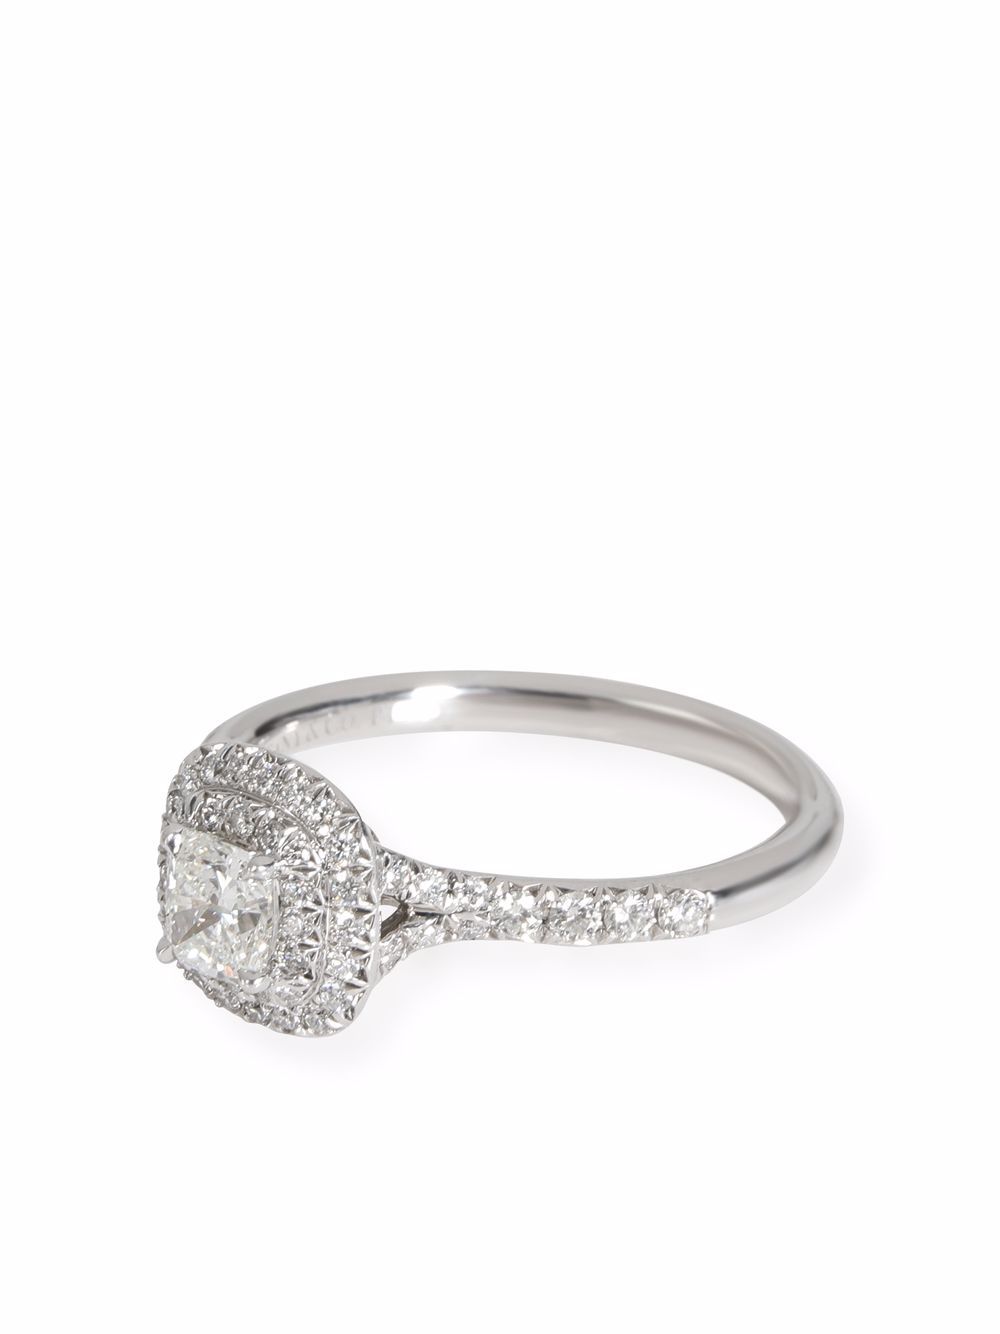 Tiffany & Co. Pre-Owned Platinum Soleste Diamond Engagement Ring - Farfetch